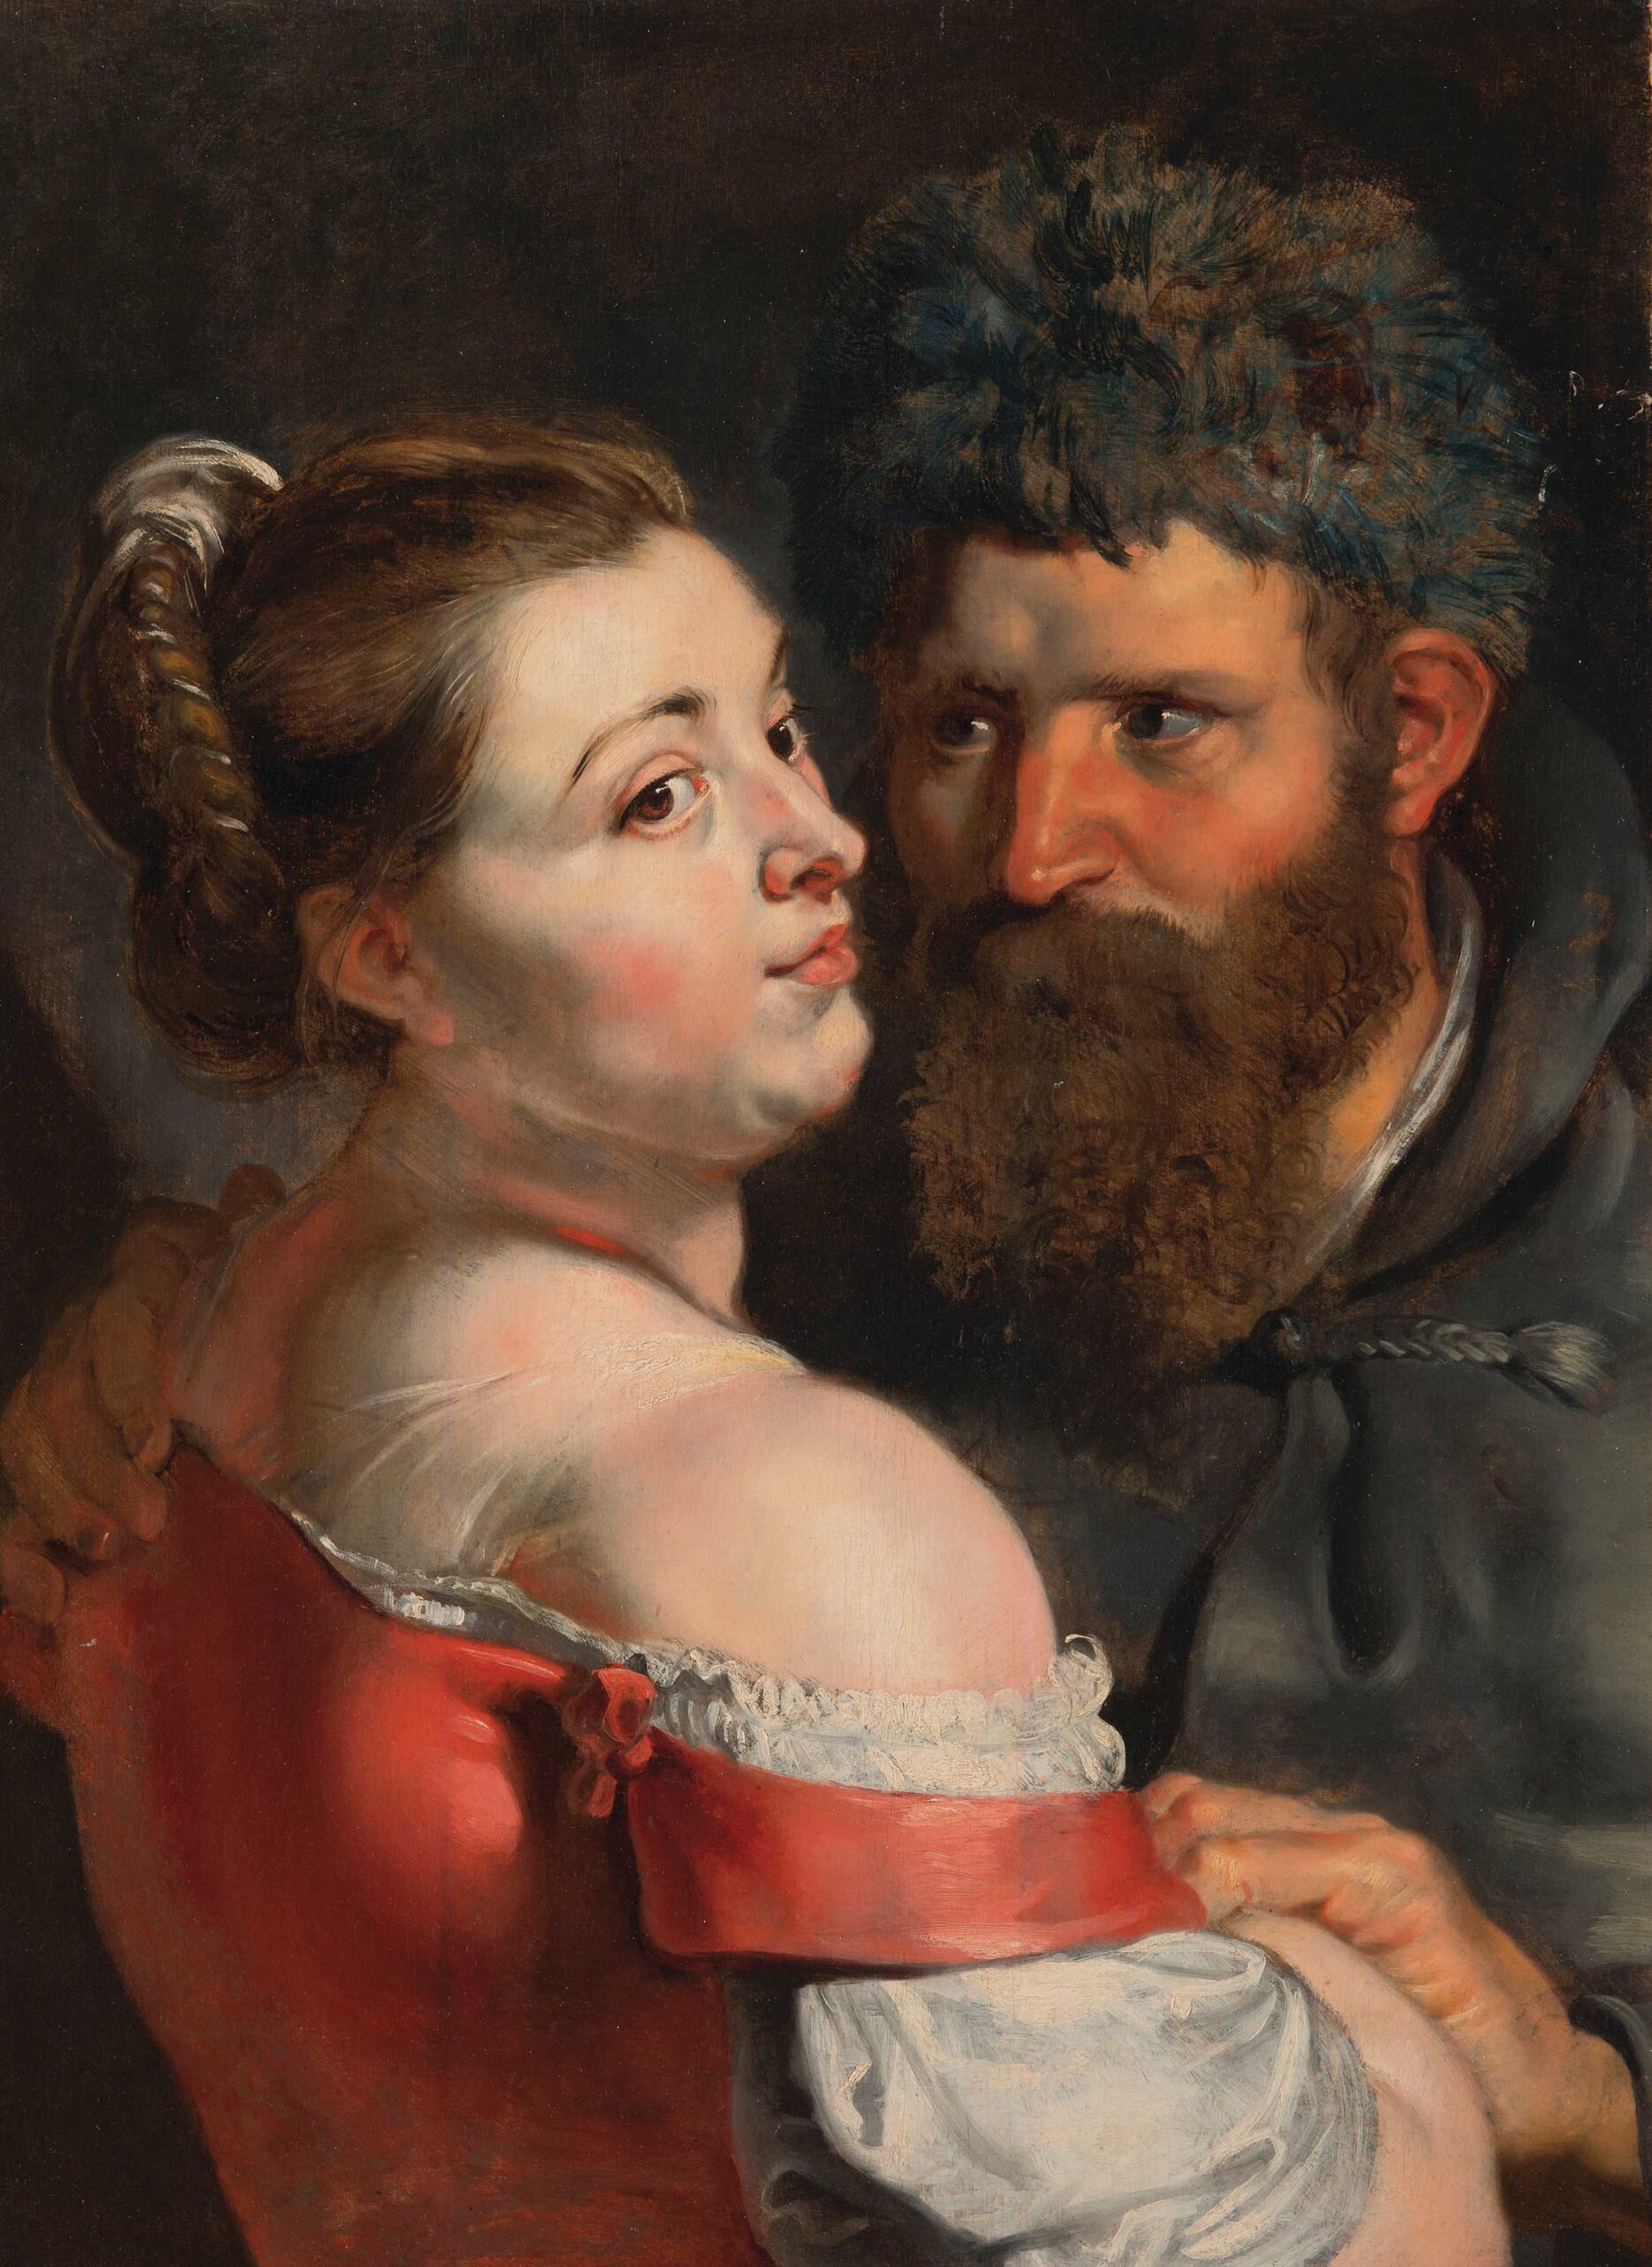 Peter Paul Rubens (1577–1640), "A Sailor and a Woman Embracing," c. 1615–18, oil on panel, 39 3/8 x 31 1/4 in., © Phoebus Foundation, Antwerp